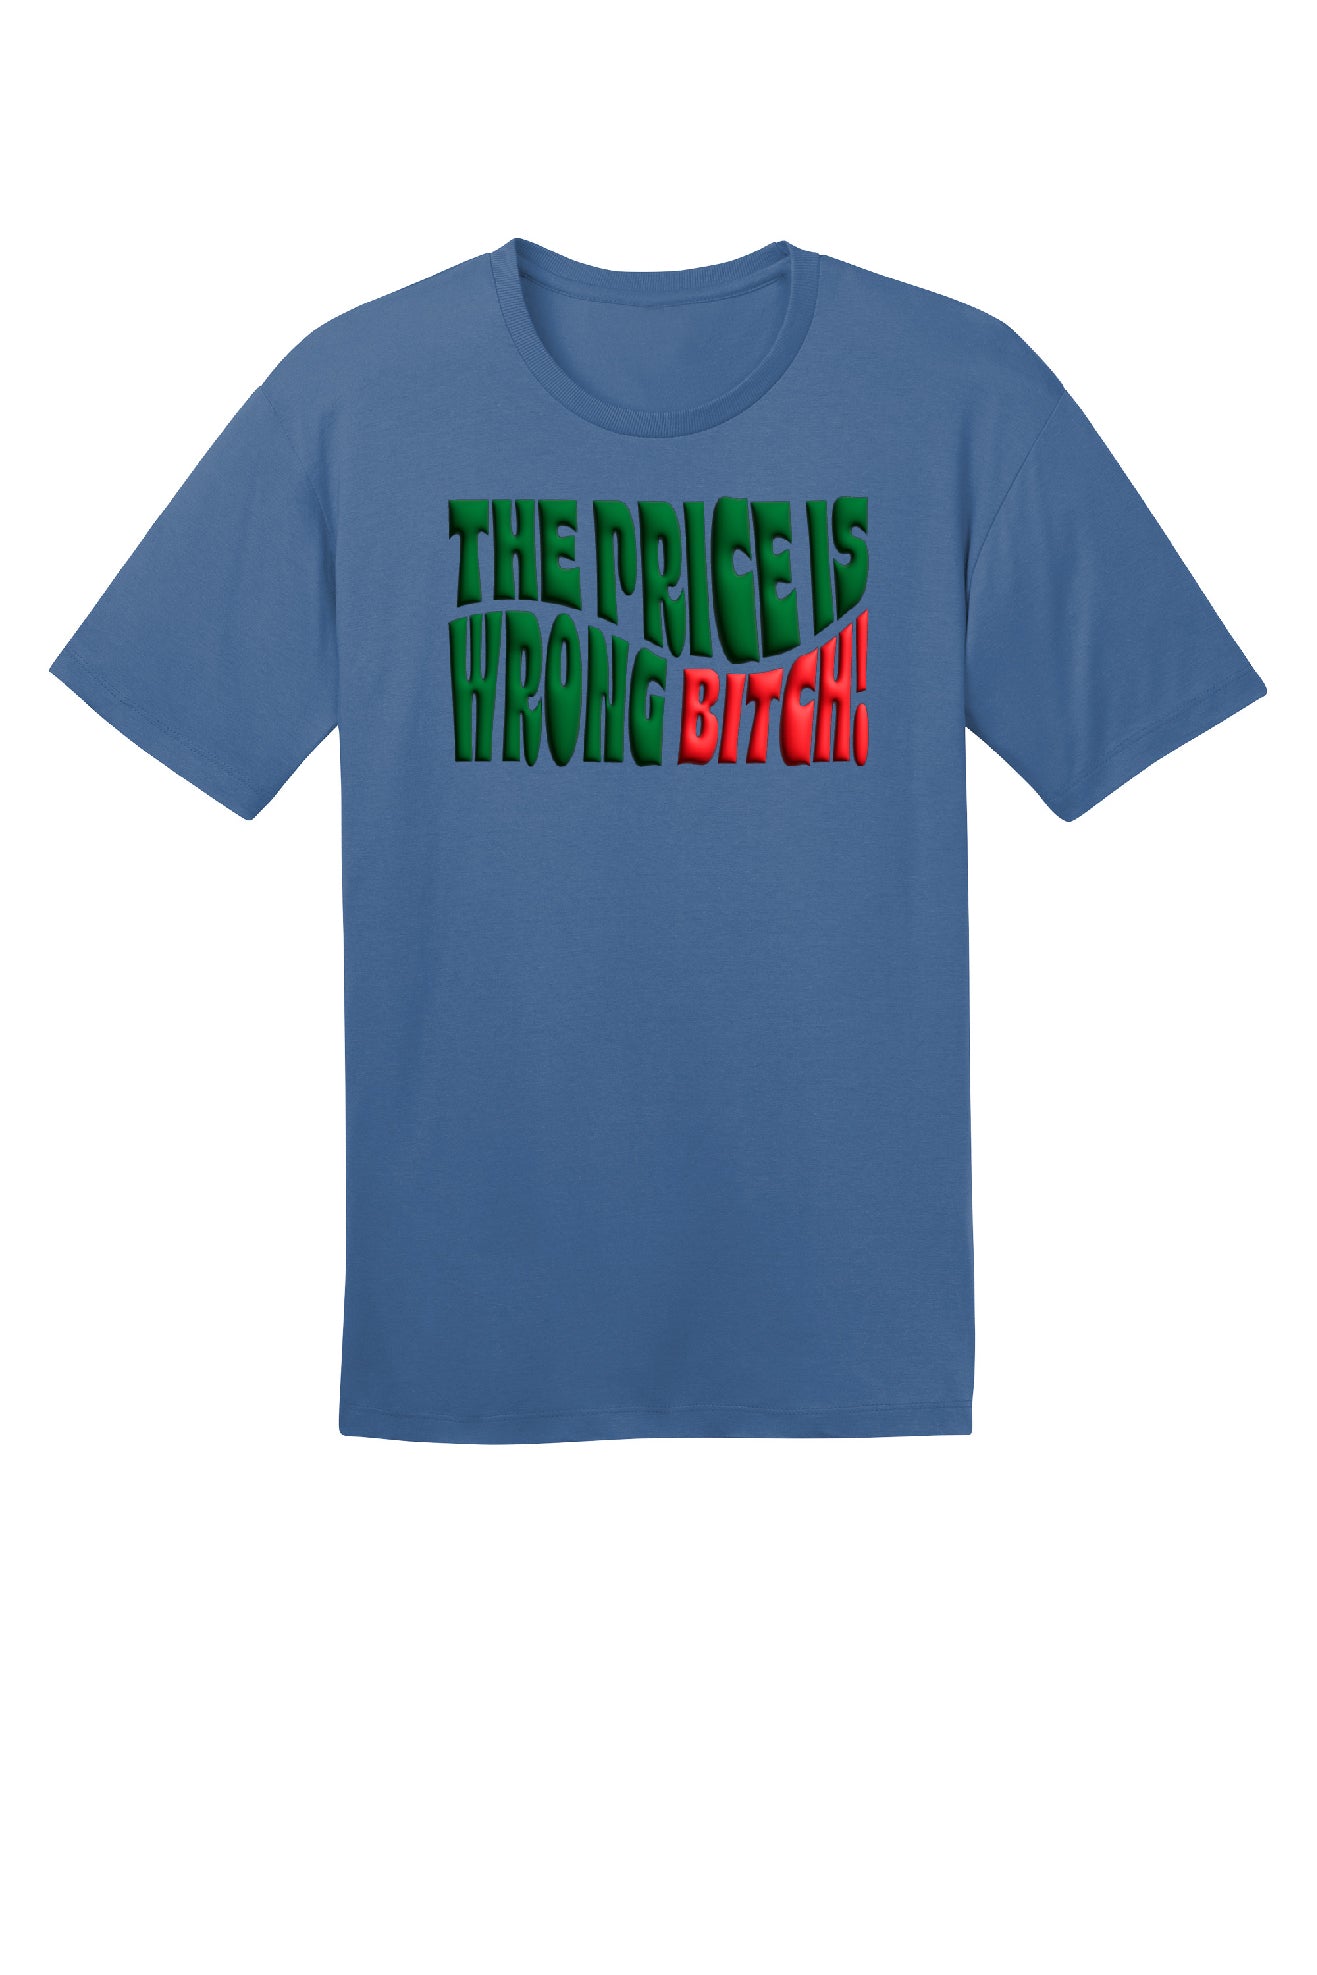 The Price is Wrong Bitch! Tee